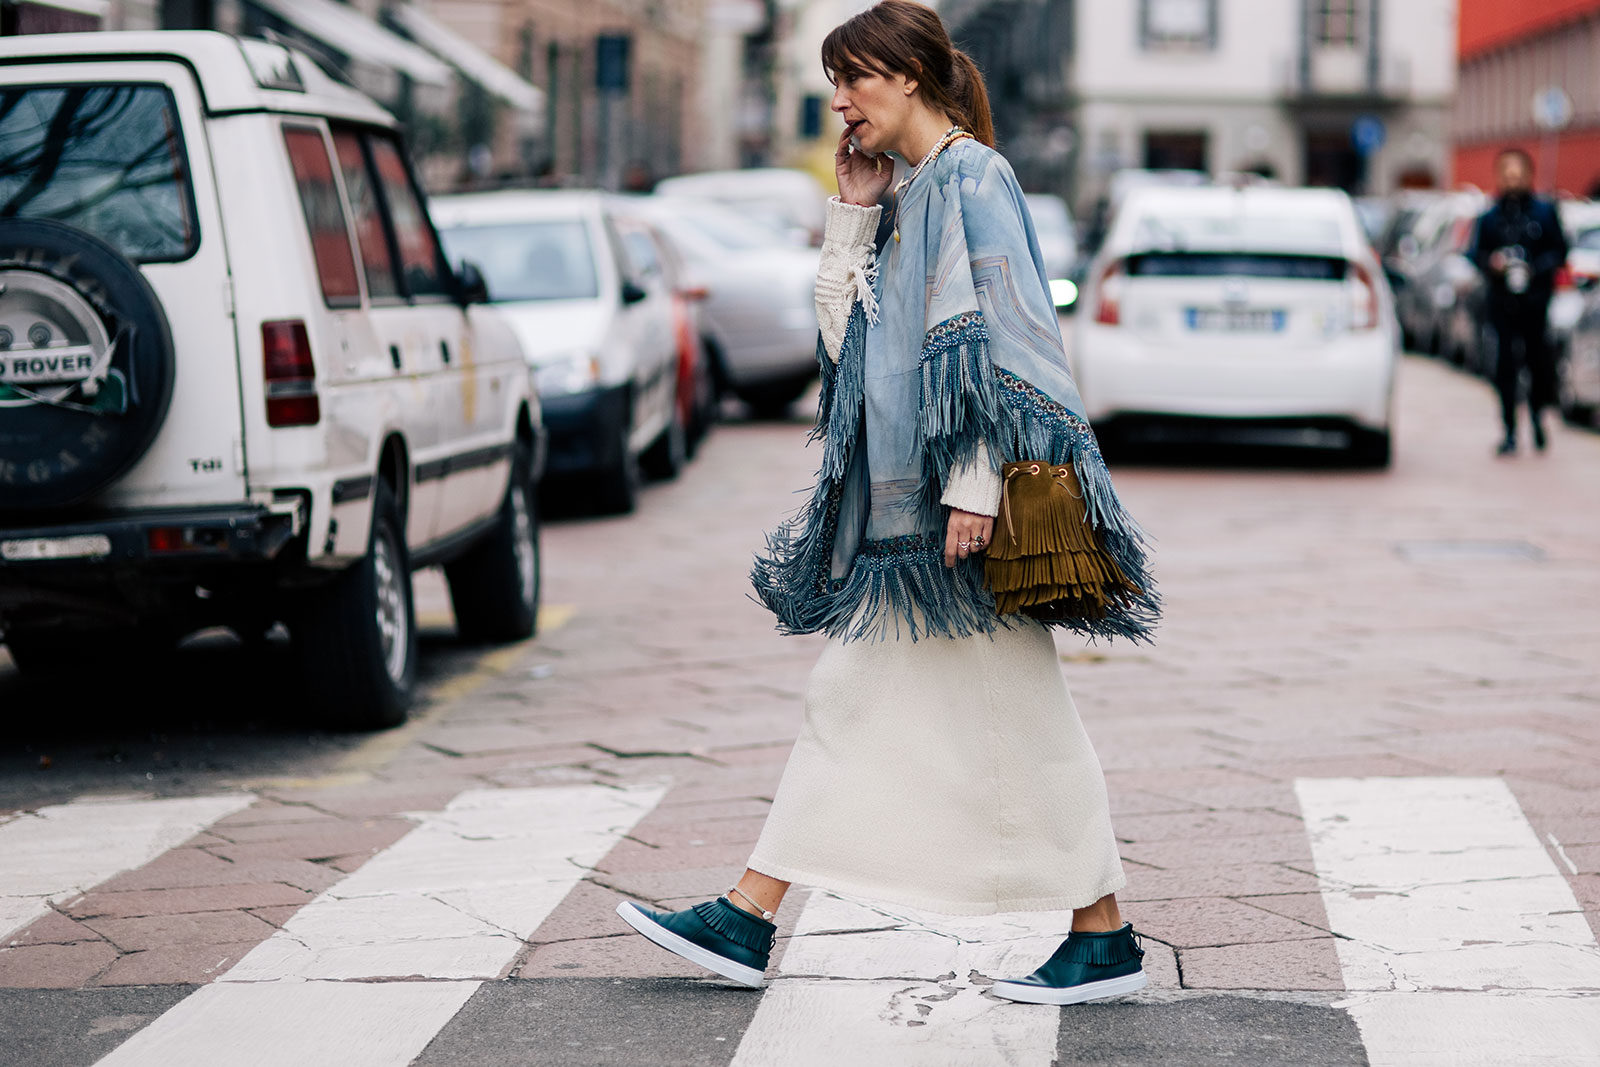 Aurora Sansone wearing a long skirt, a fringed poncho and fringed bag in Milan, Italy